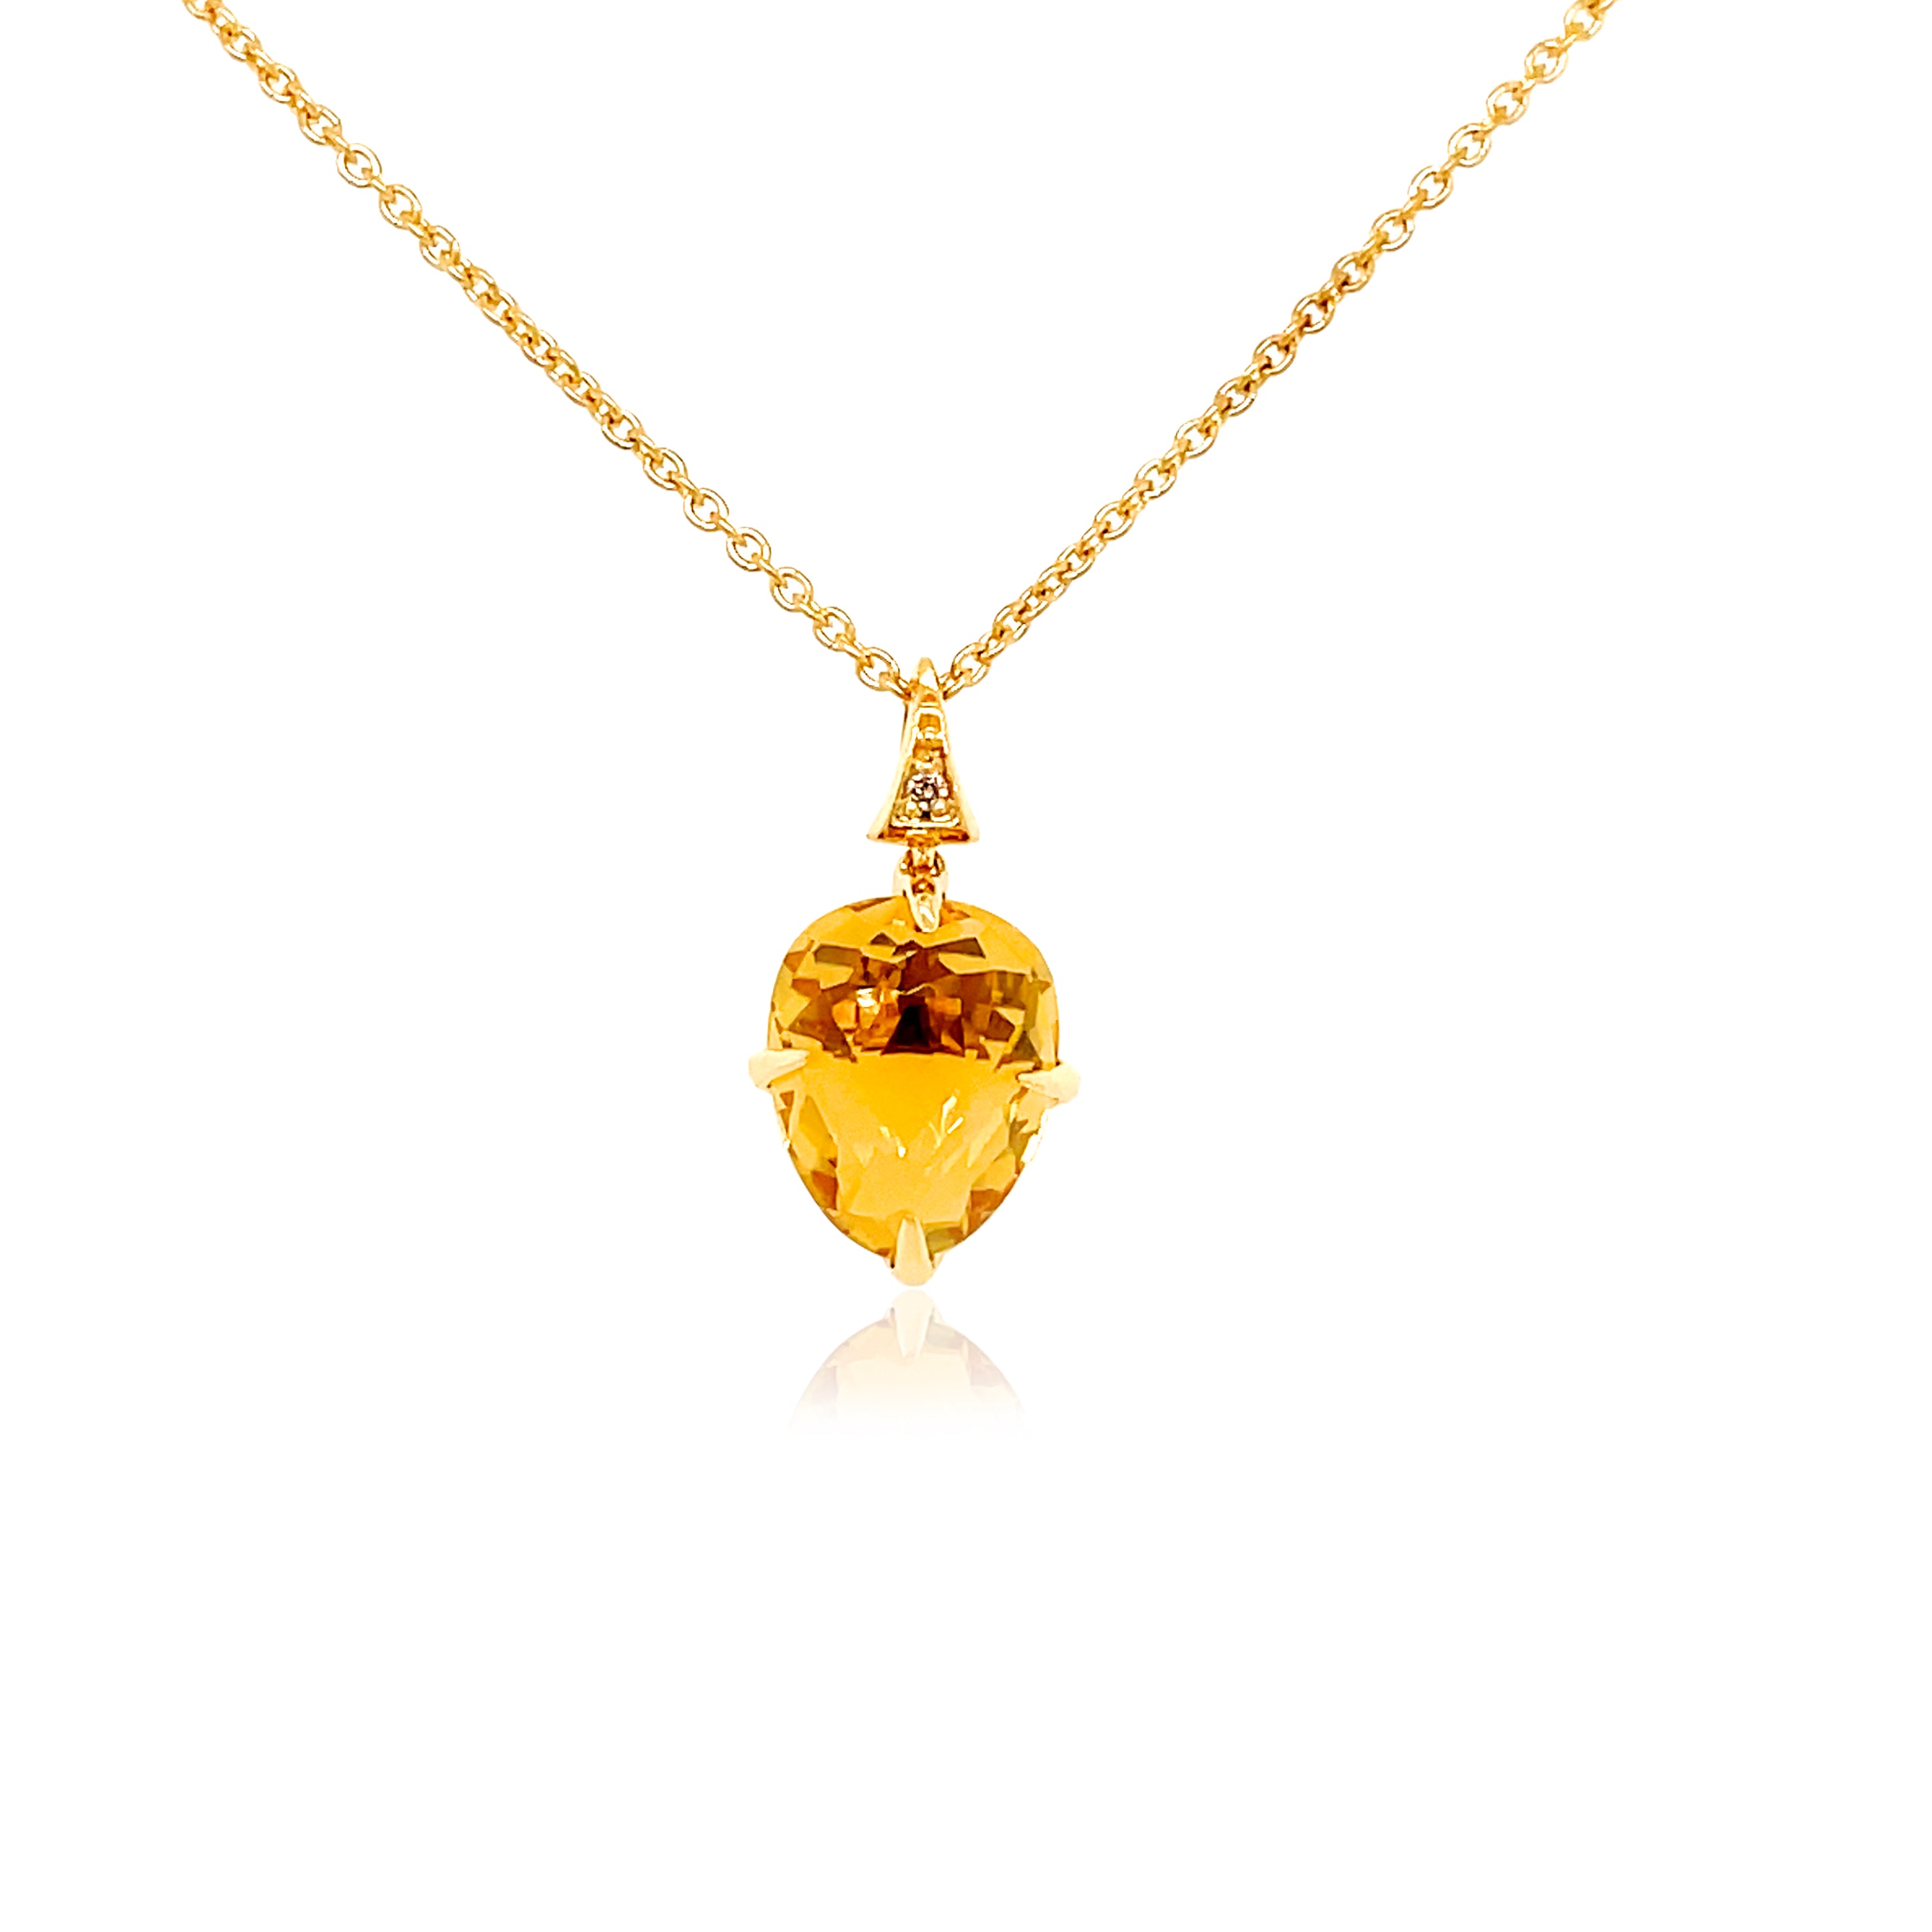 Sugar loaf collection made in Brazil  Tear shape faceted Citrine 3.10 cts  Round small diamonds 0.07 cts  Set in 18k yellow gold  Triangle shape bail   18.00 mm 